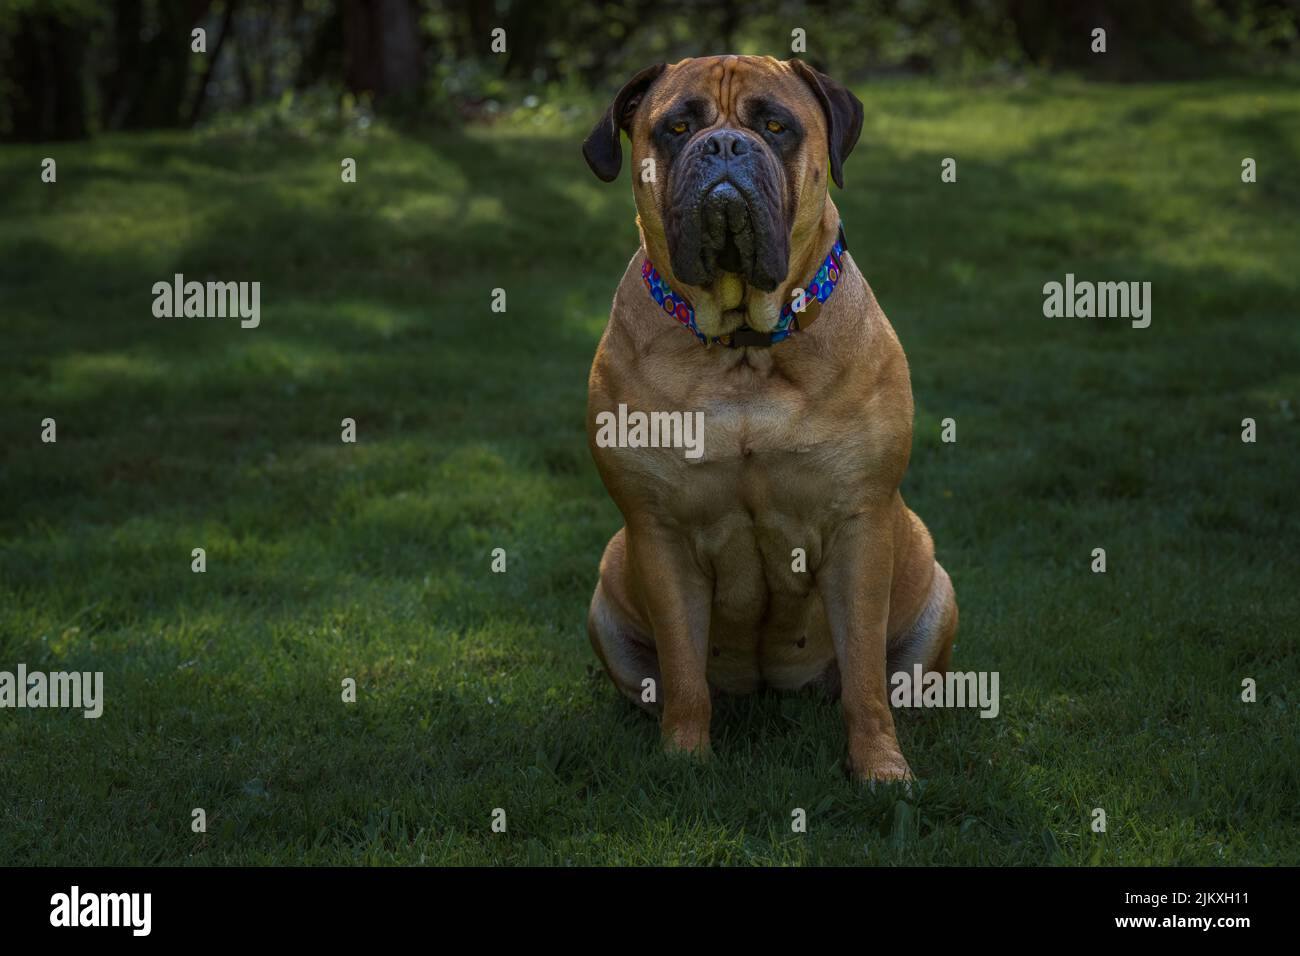 A LARGE BULLMASTIFF WITH BRIGHT ORANGE EYES SITTING IN A DARK GREEN FIELD WEARING A MULTI COLORED COLLAR WITH A BLURRY BACKGROUND Stock Photo